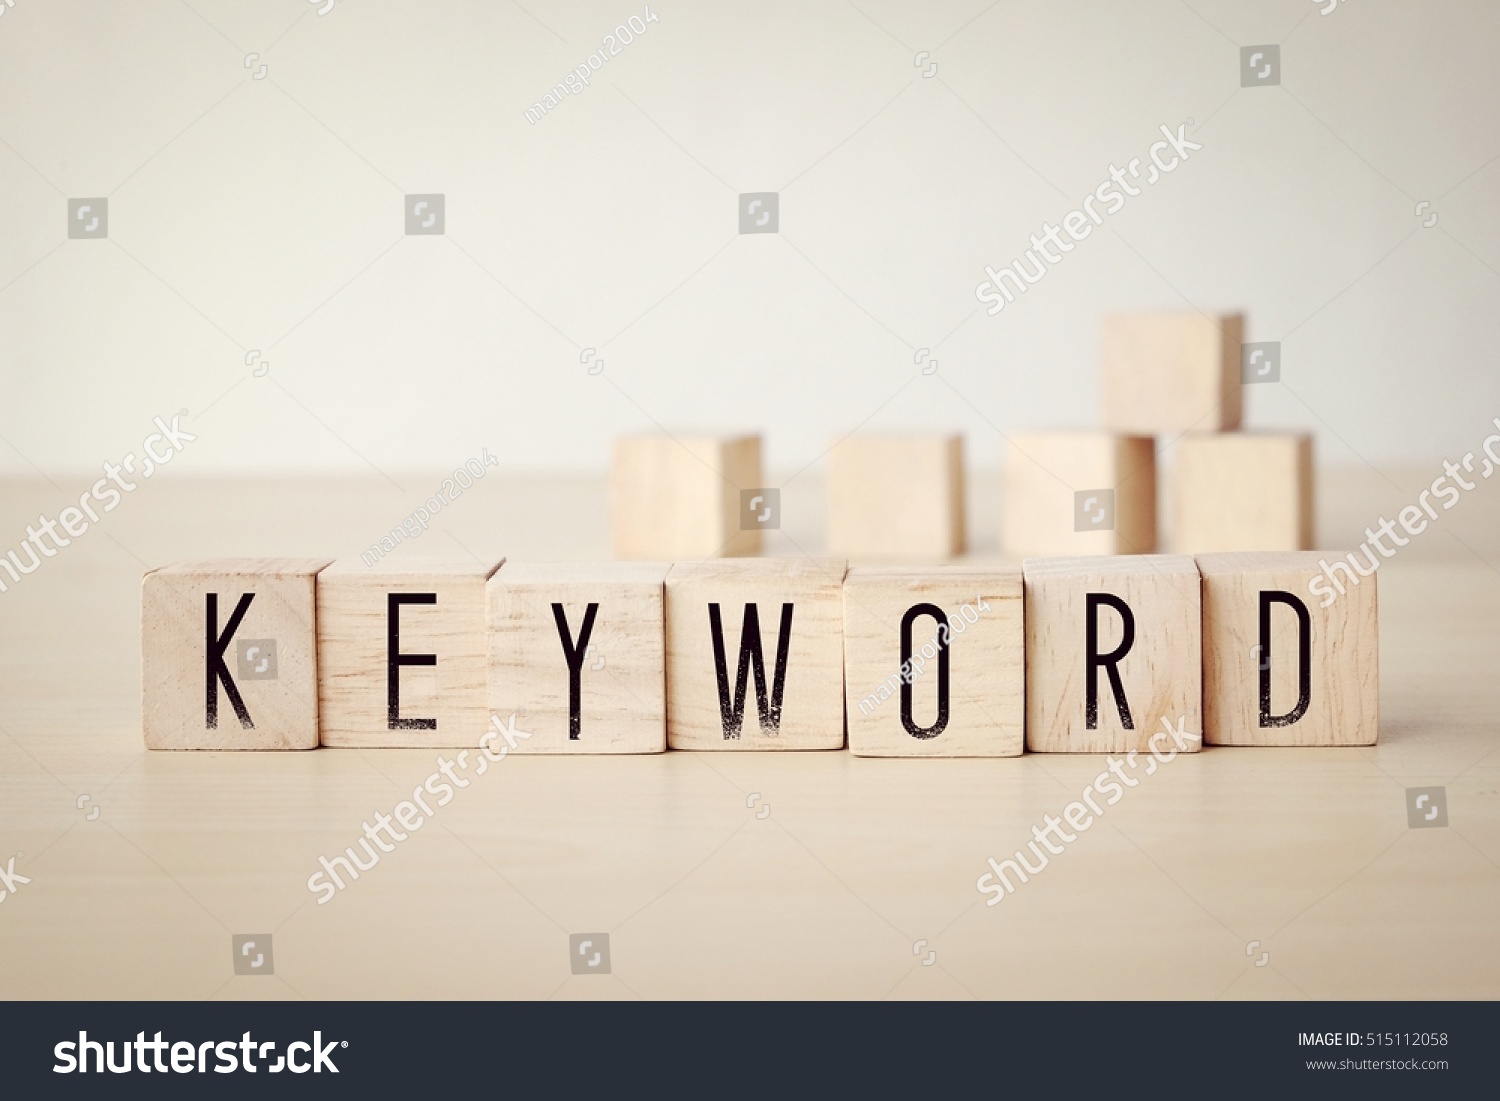 Keyword word on wooden cubes background, SEO concept #515112058